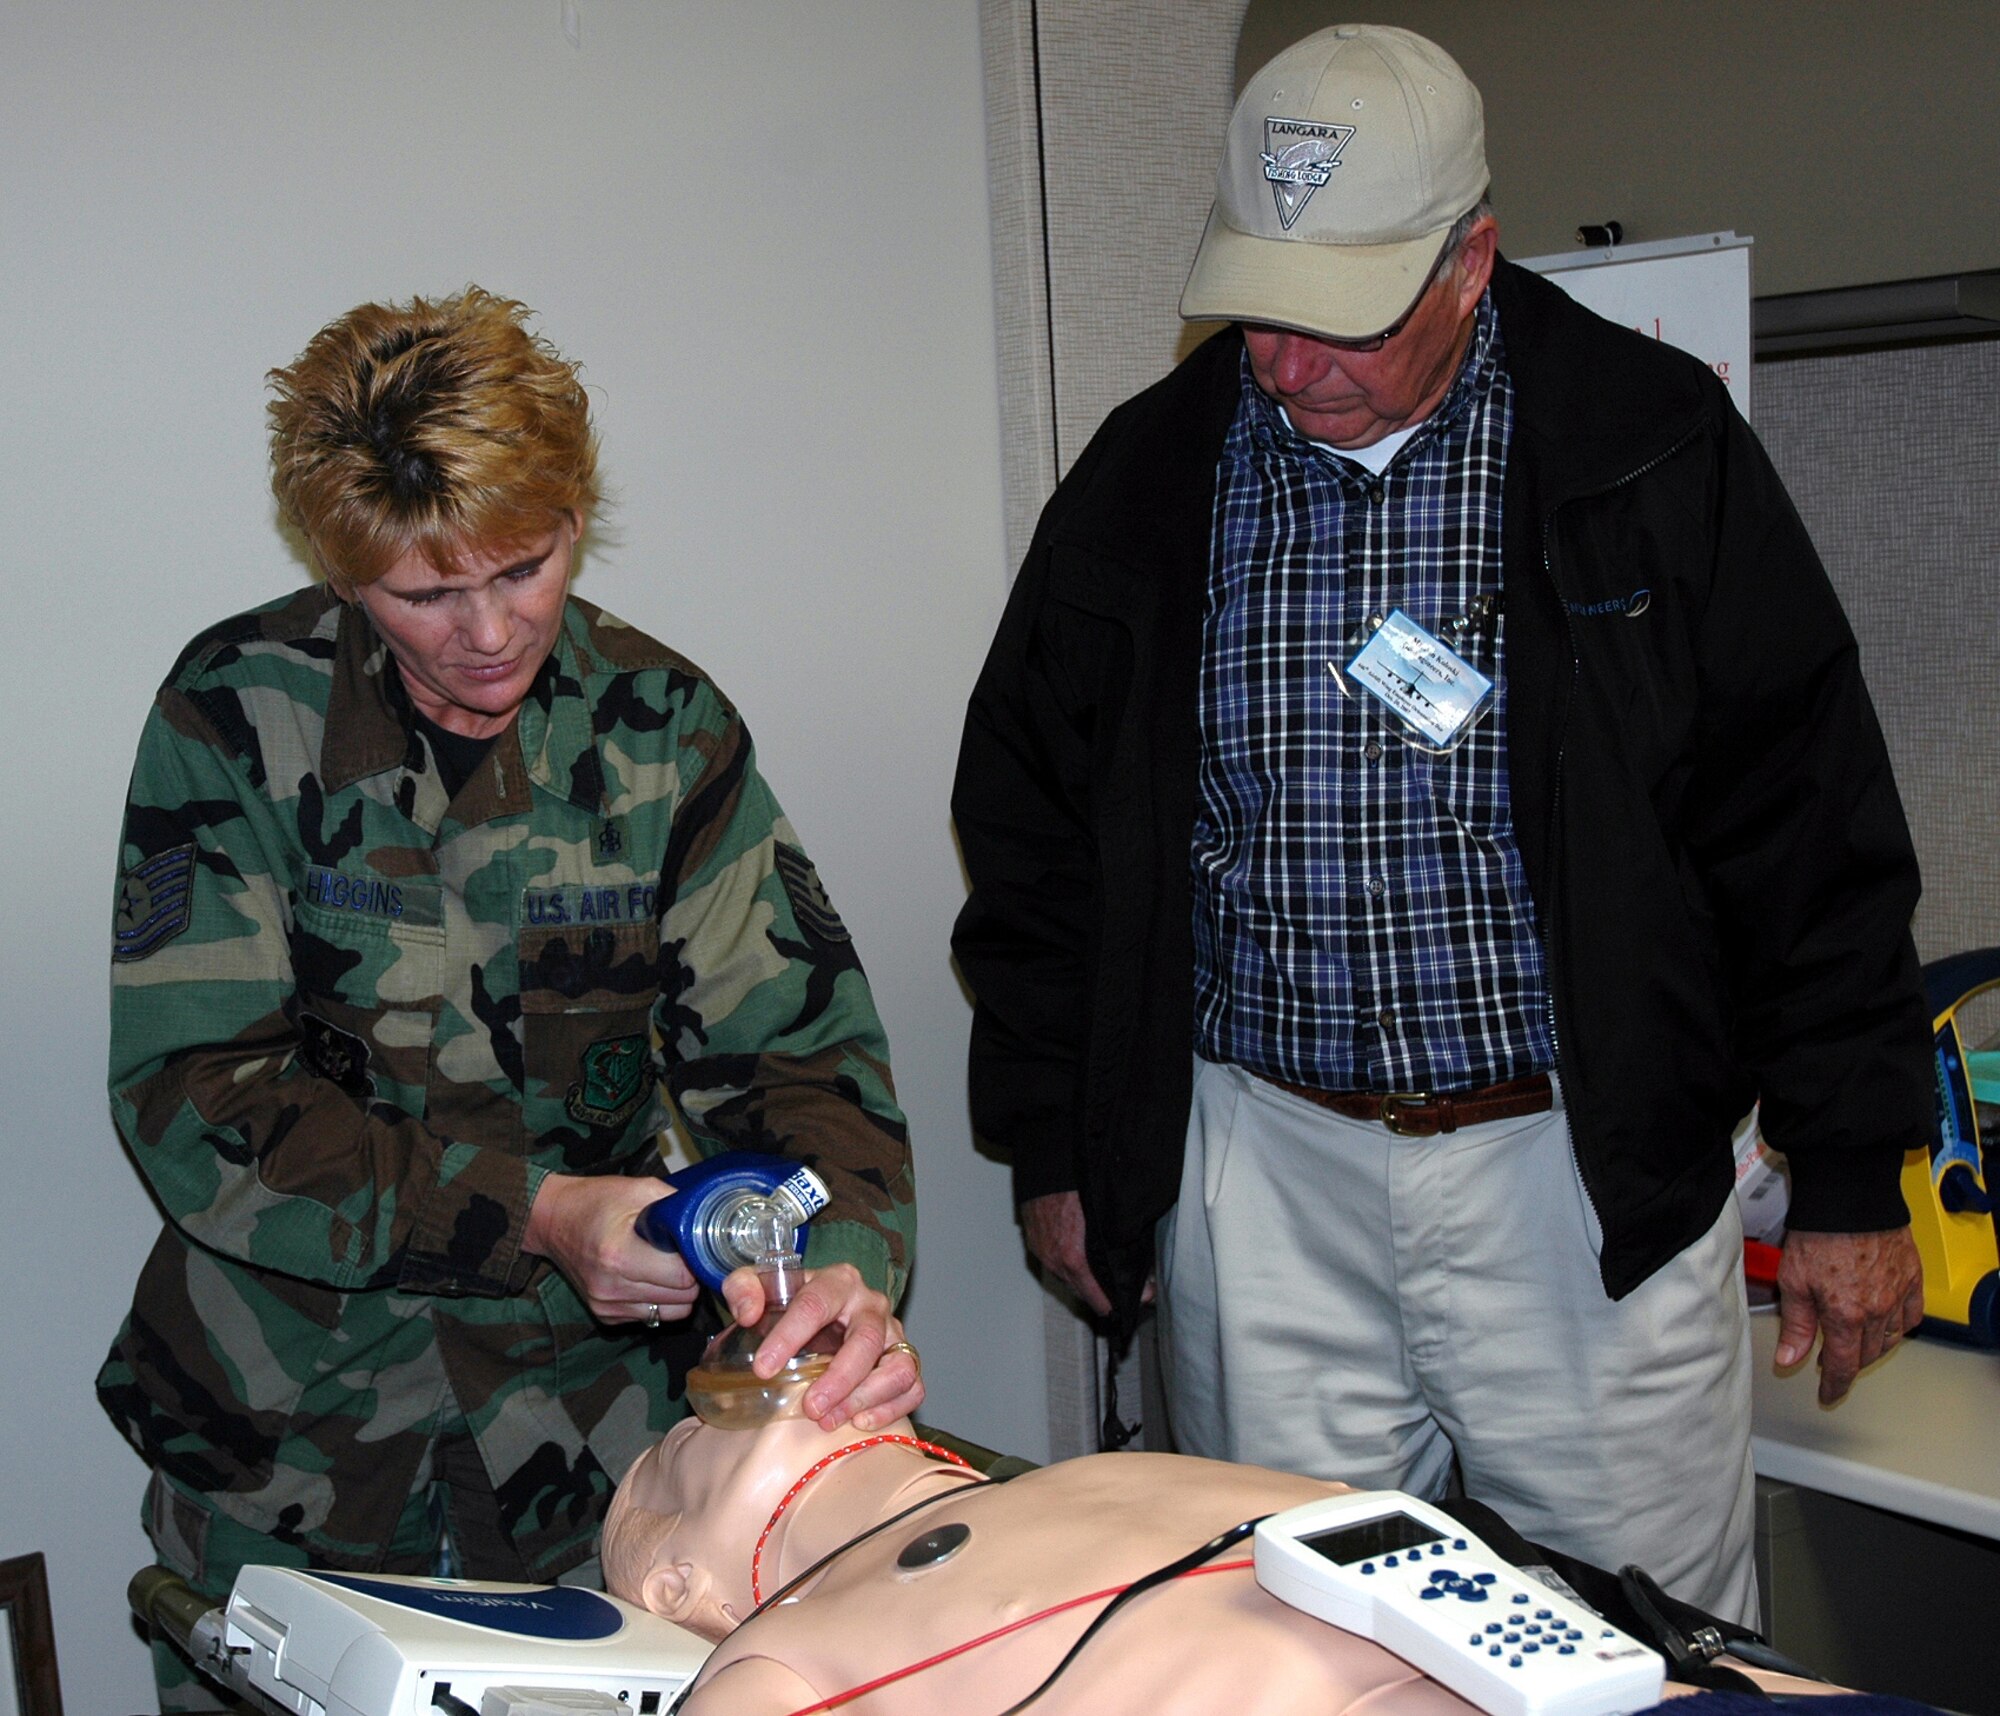 Tech. Sgt. Pam Higgins, 446th Aeromedical Staging Squadron, shows Jon Koloski how to give oxygen through a bag to a "patient," at the 446th ASTS Skills Lab.  Mr. Koloski, along with 36 other civilian employers of Air Force Reservists, spent Oct. 20 learning the jobs of their employees who also serve in the Air Force Reserve during the 446th Airlift Wing's Employer Orientation Day at McChord Air Force Base, Wash. (U.S. Air Force photo/Capt. Jennifer Gerhardt)  